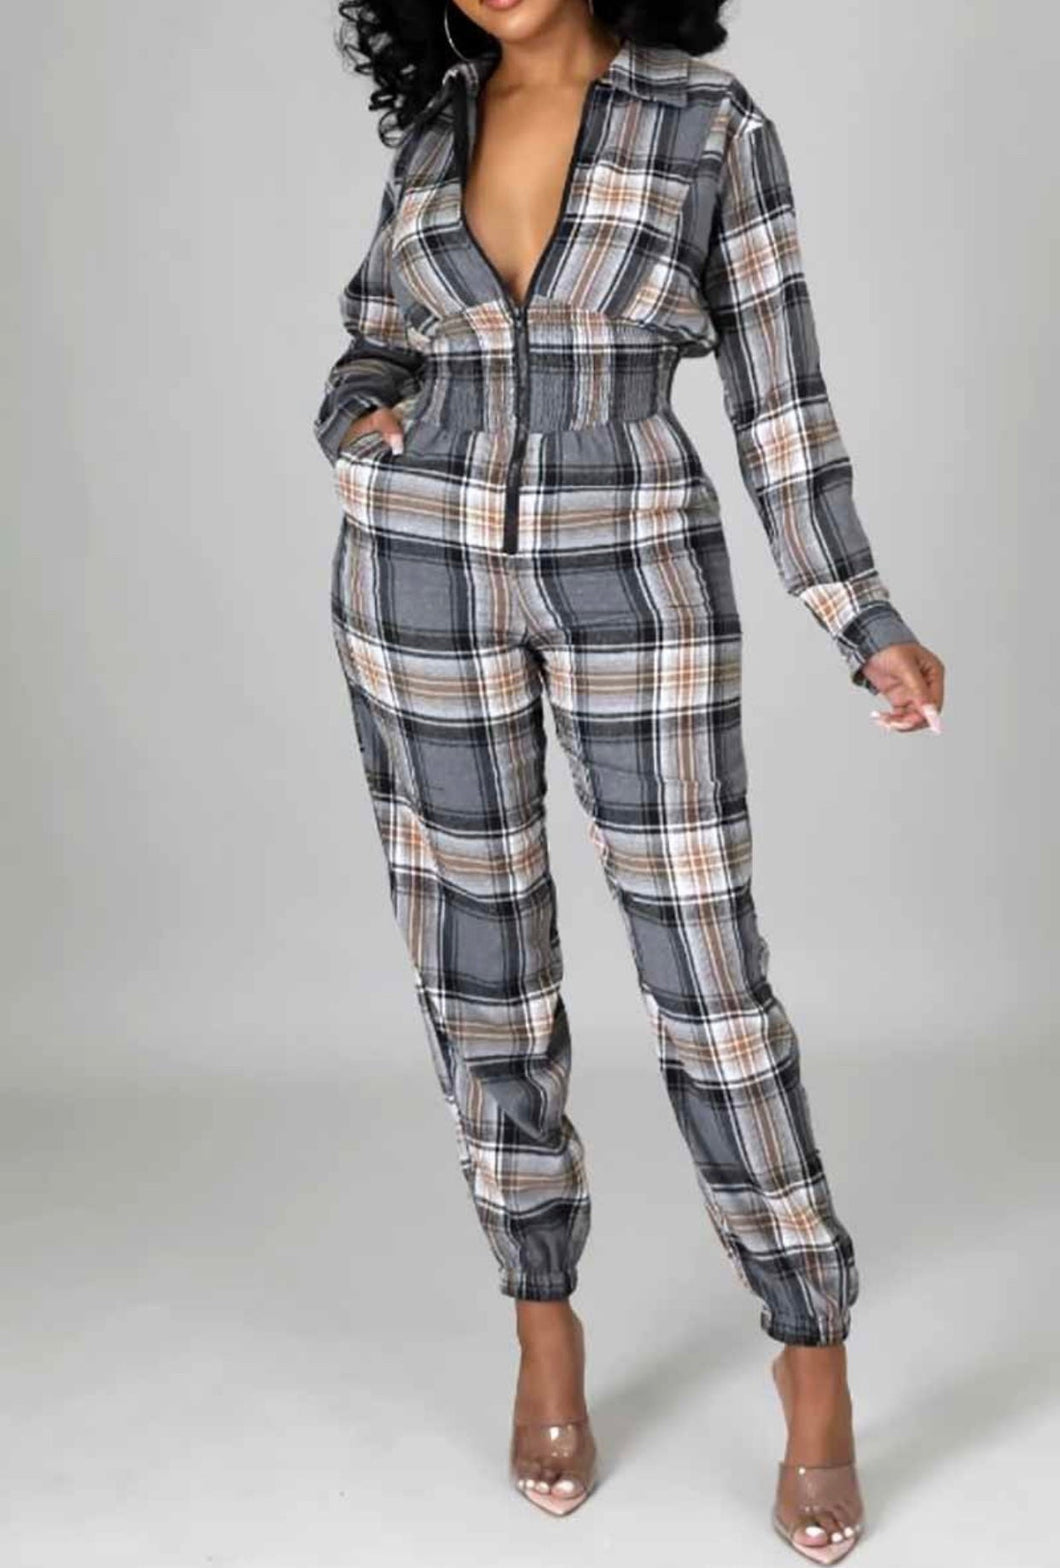 Around the way Girl,  plaid distressed jumper